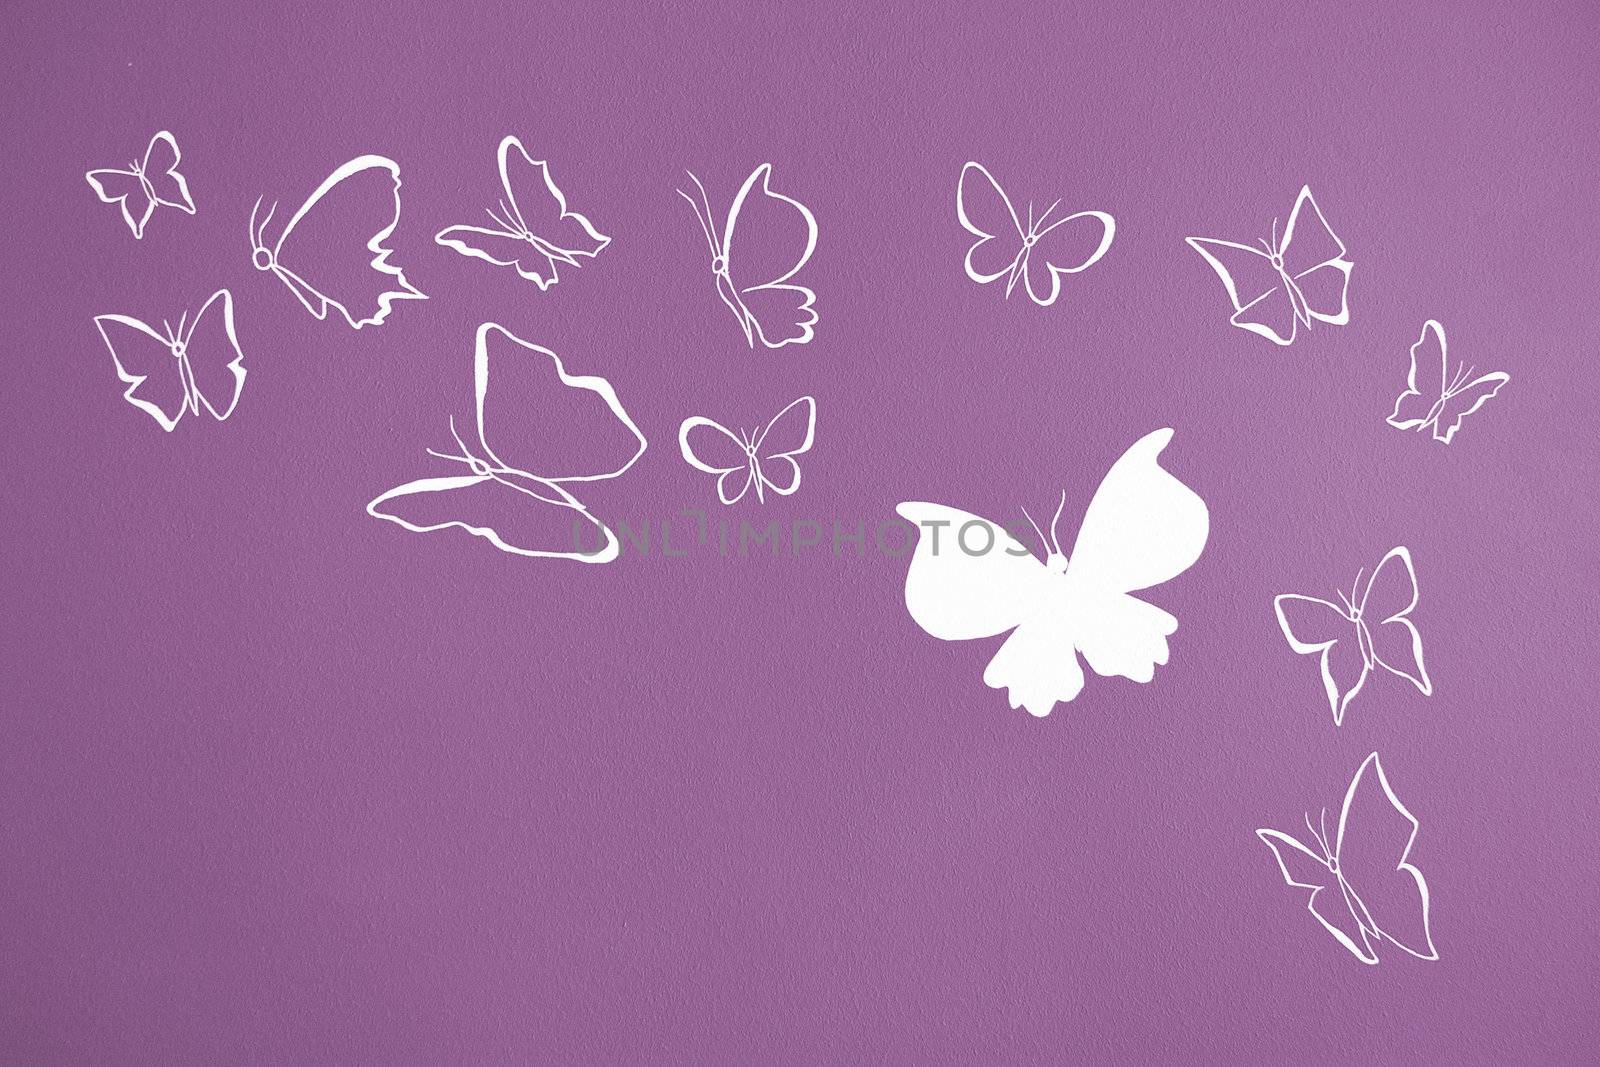 Background of white silhouettes butterflies flying by doble.d